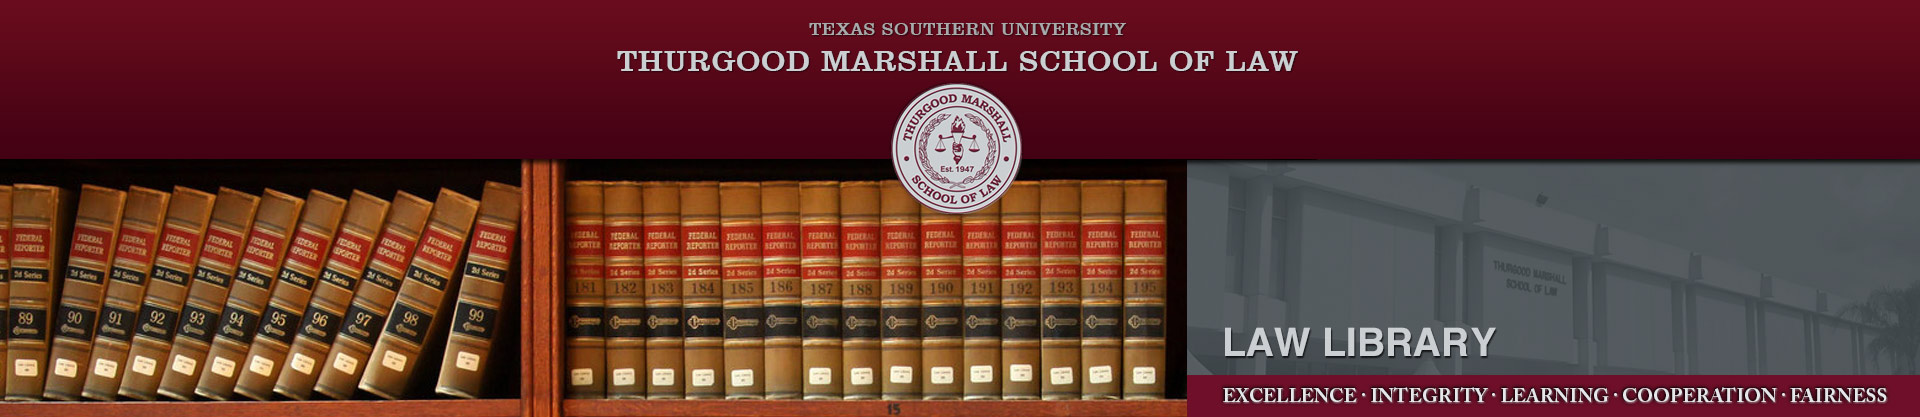 Faculty directory at Thurgood Marshall School of Law